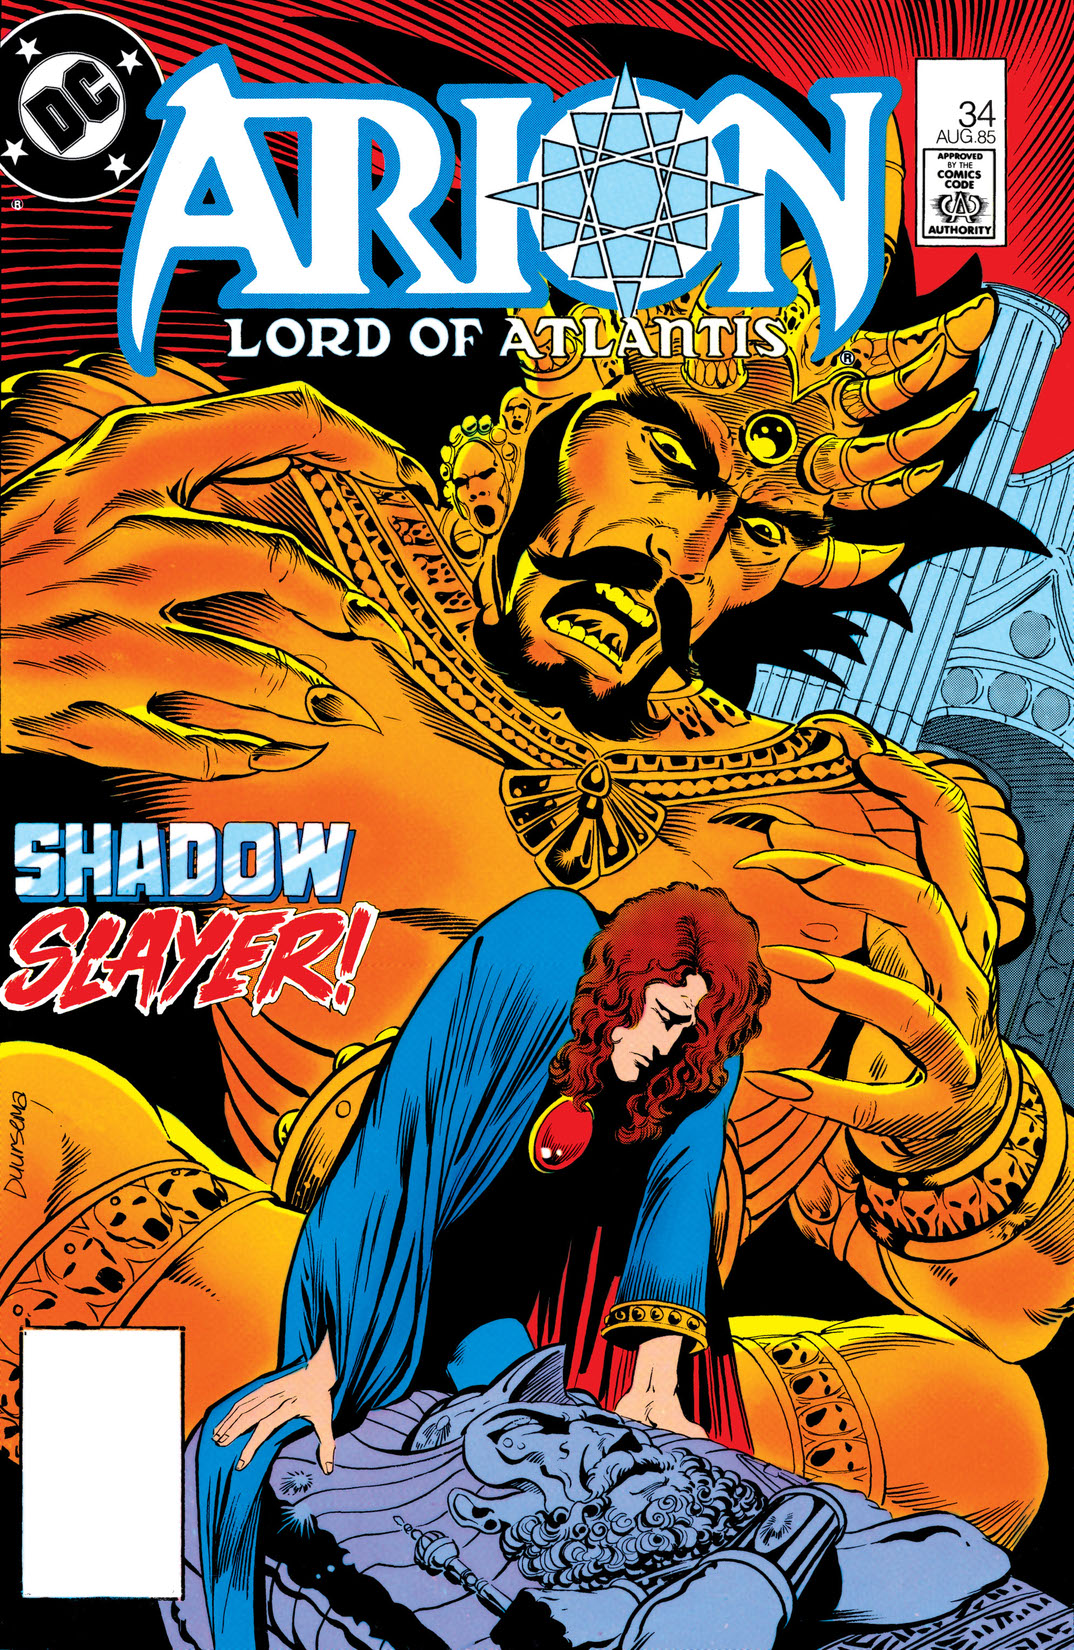 Arion, Lord of Atlantis #34 preview images